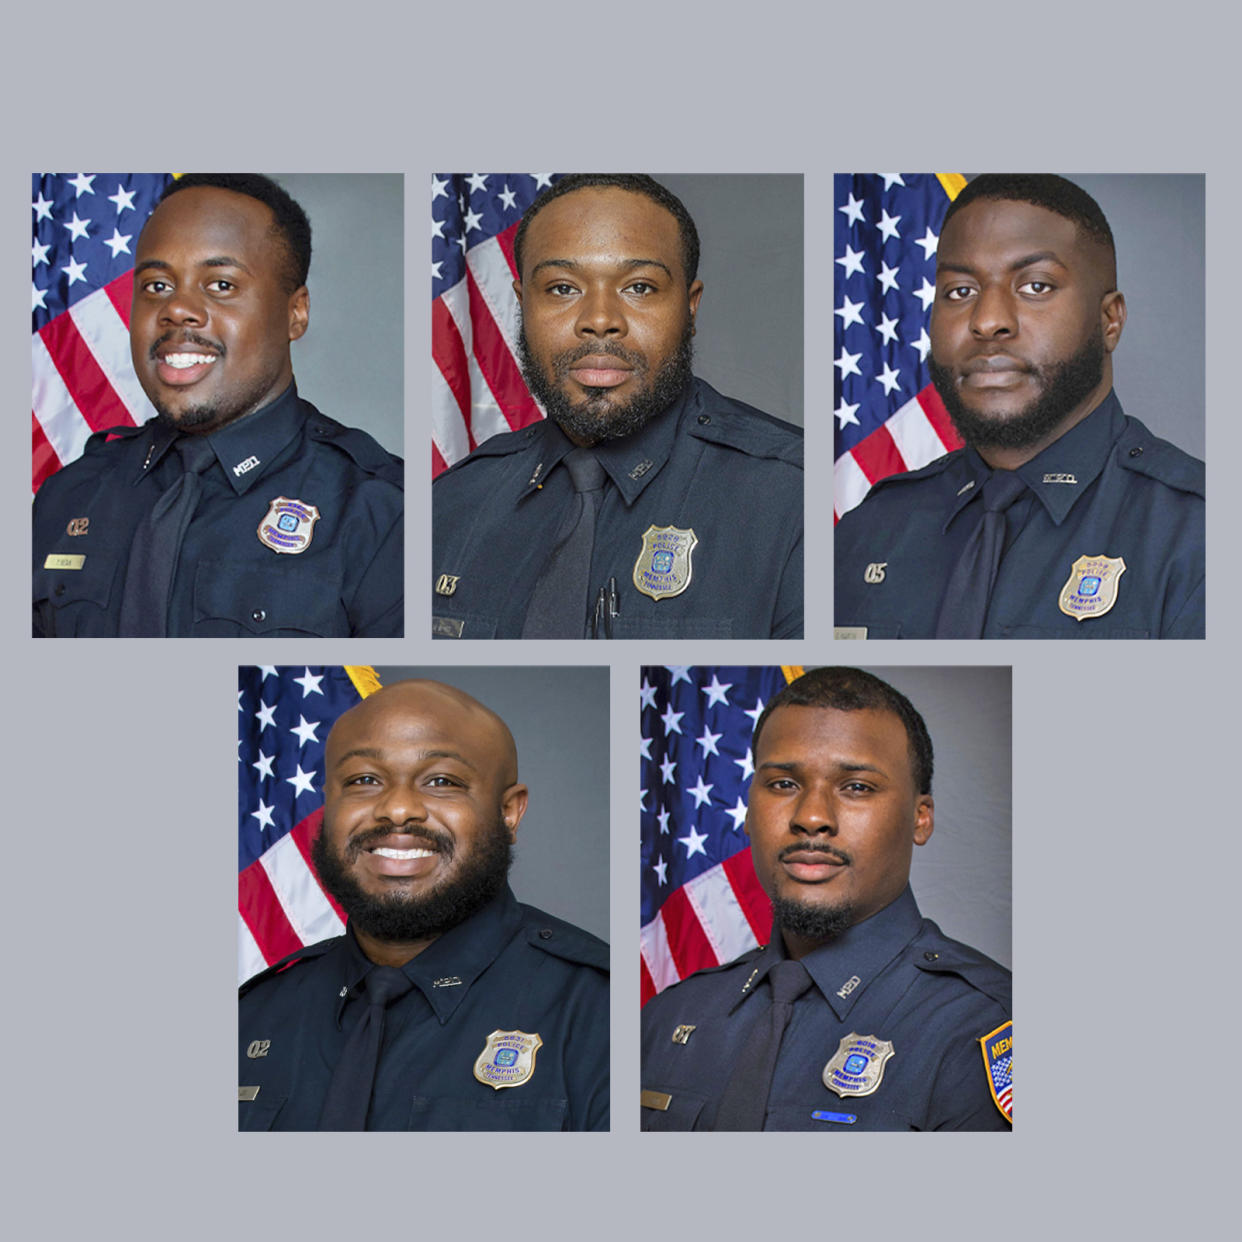 Five Memphis police officers were fired in connection with a traffic stop that led to the death of Tyre Nichols. Clockwise from top left: Tadarrius Bean, Demetrius Haley, Emmitt Martin III, Justin Smith and Desmond Mills Jr. (Memphis Police Dept. via AP)